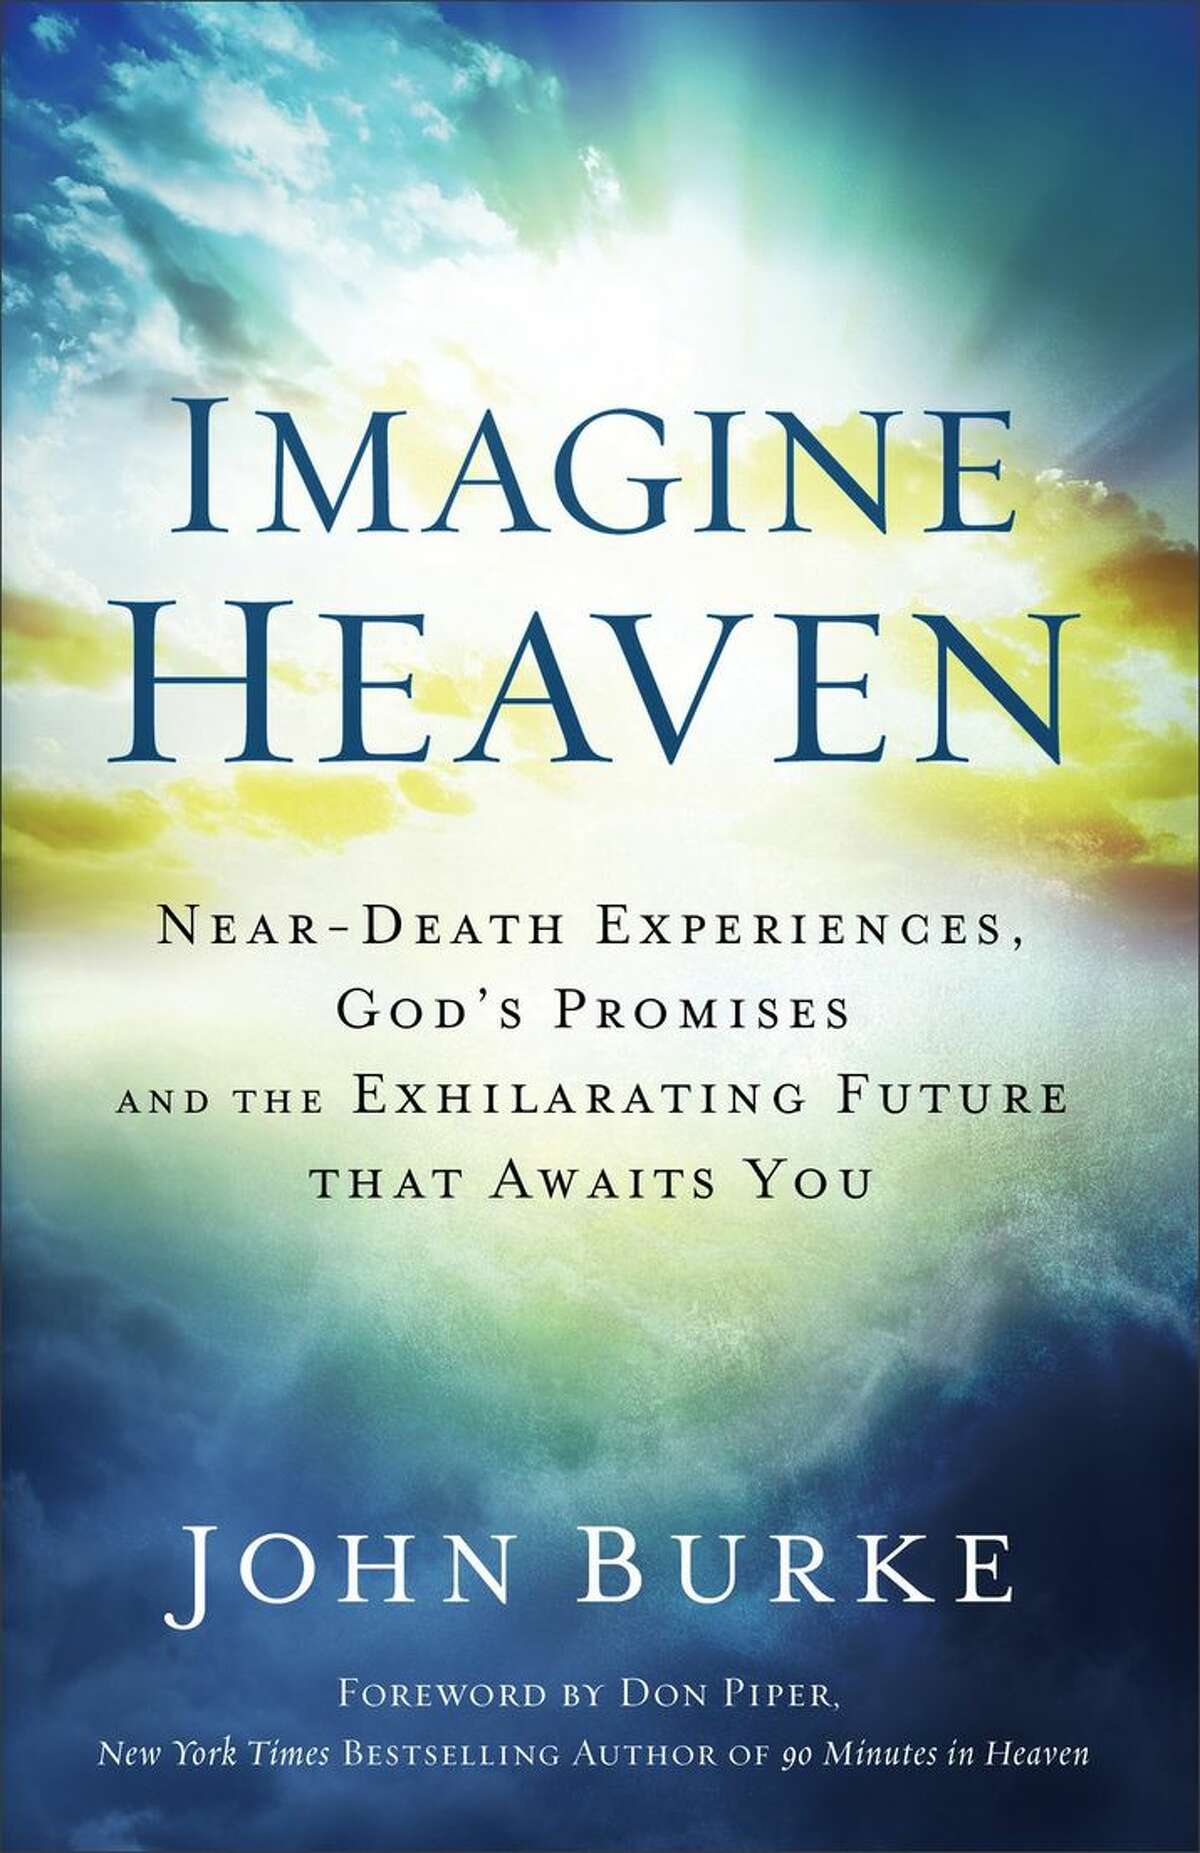 "Imagine Heaven: Near-Death Experiences, God's Promises, and the Exhilarating Future That Awaits You" by John Burke (Baker Publishing Group, $15, 352 pages)